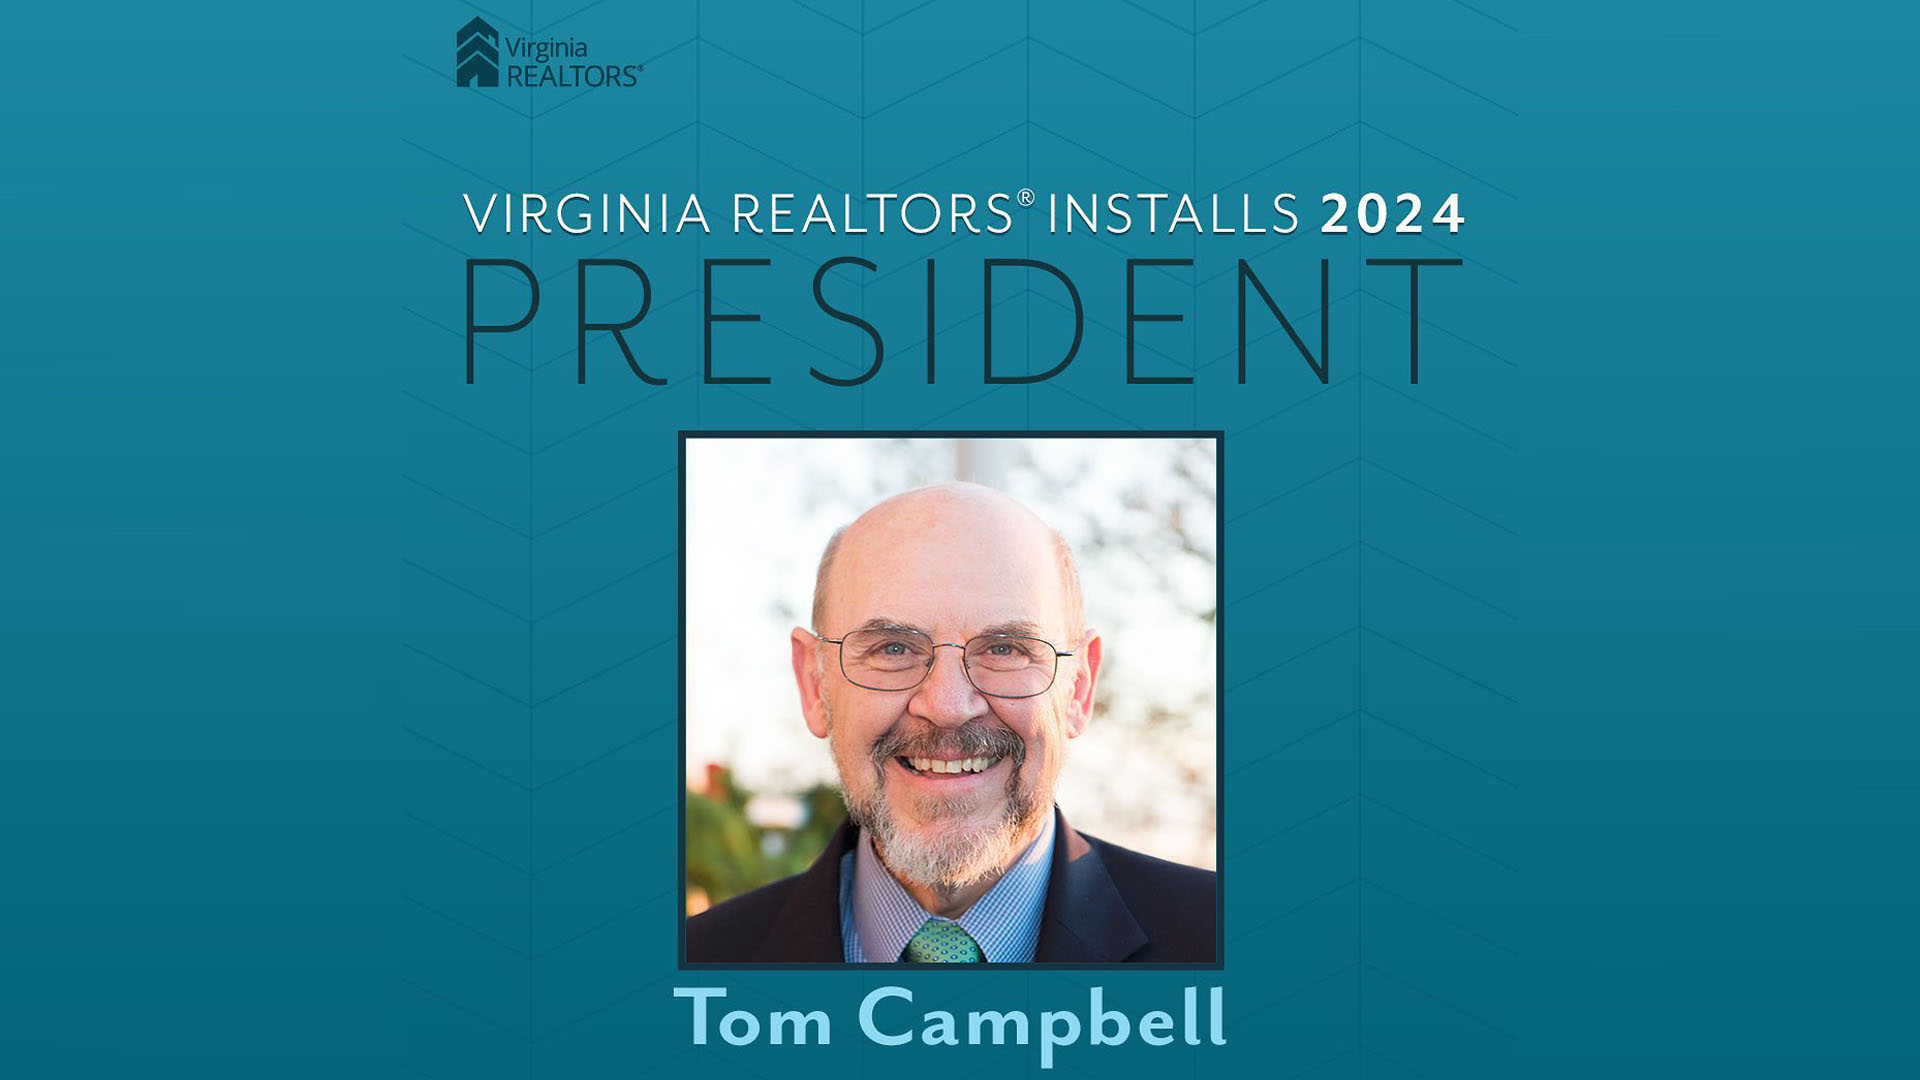 Featured image for “Tom Campbell Takes the Helm as President of Virginia REALTORS®: A Journey of Service and Leadership”